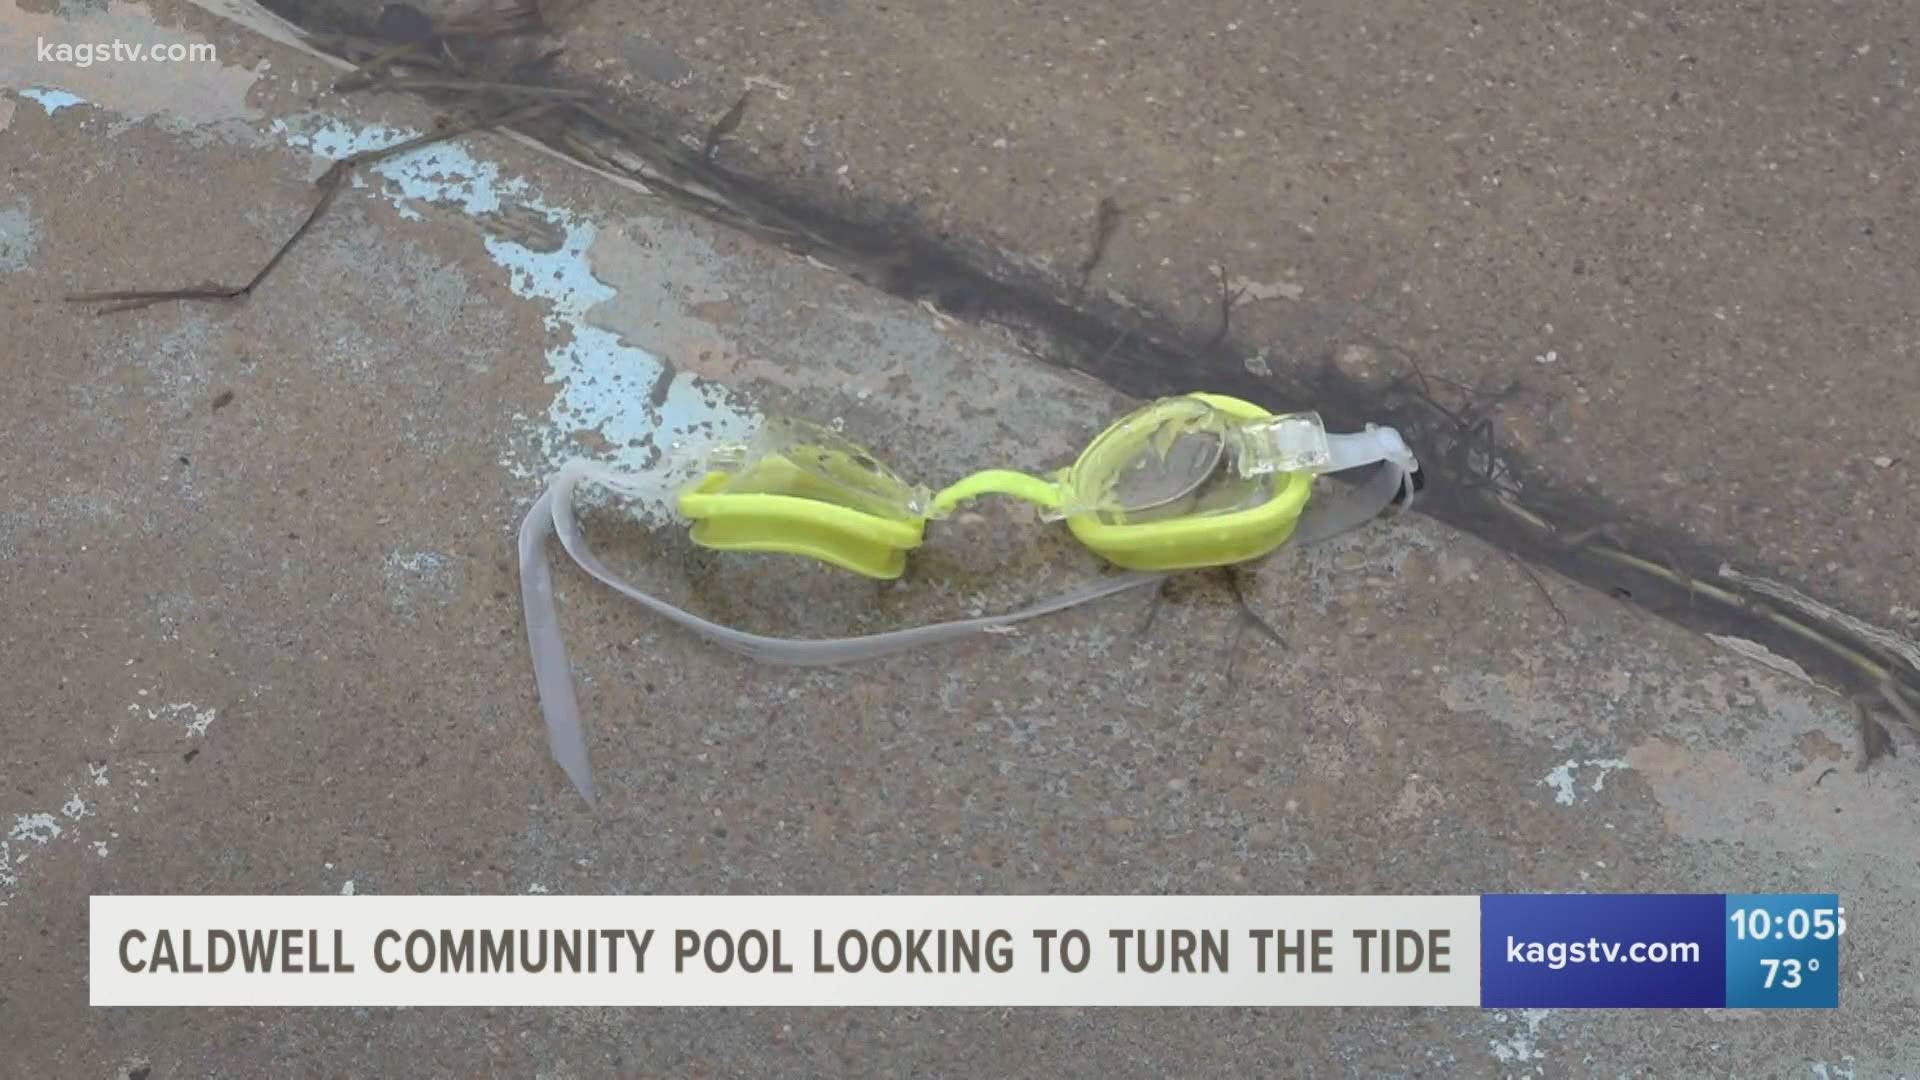 The local establishment has been bringing people together for decades. Today, the pool is in desperate need of help.